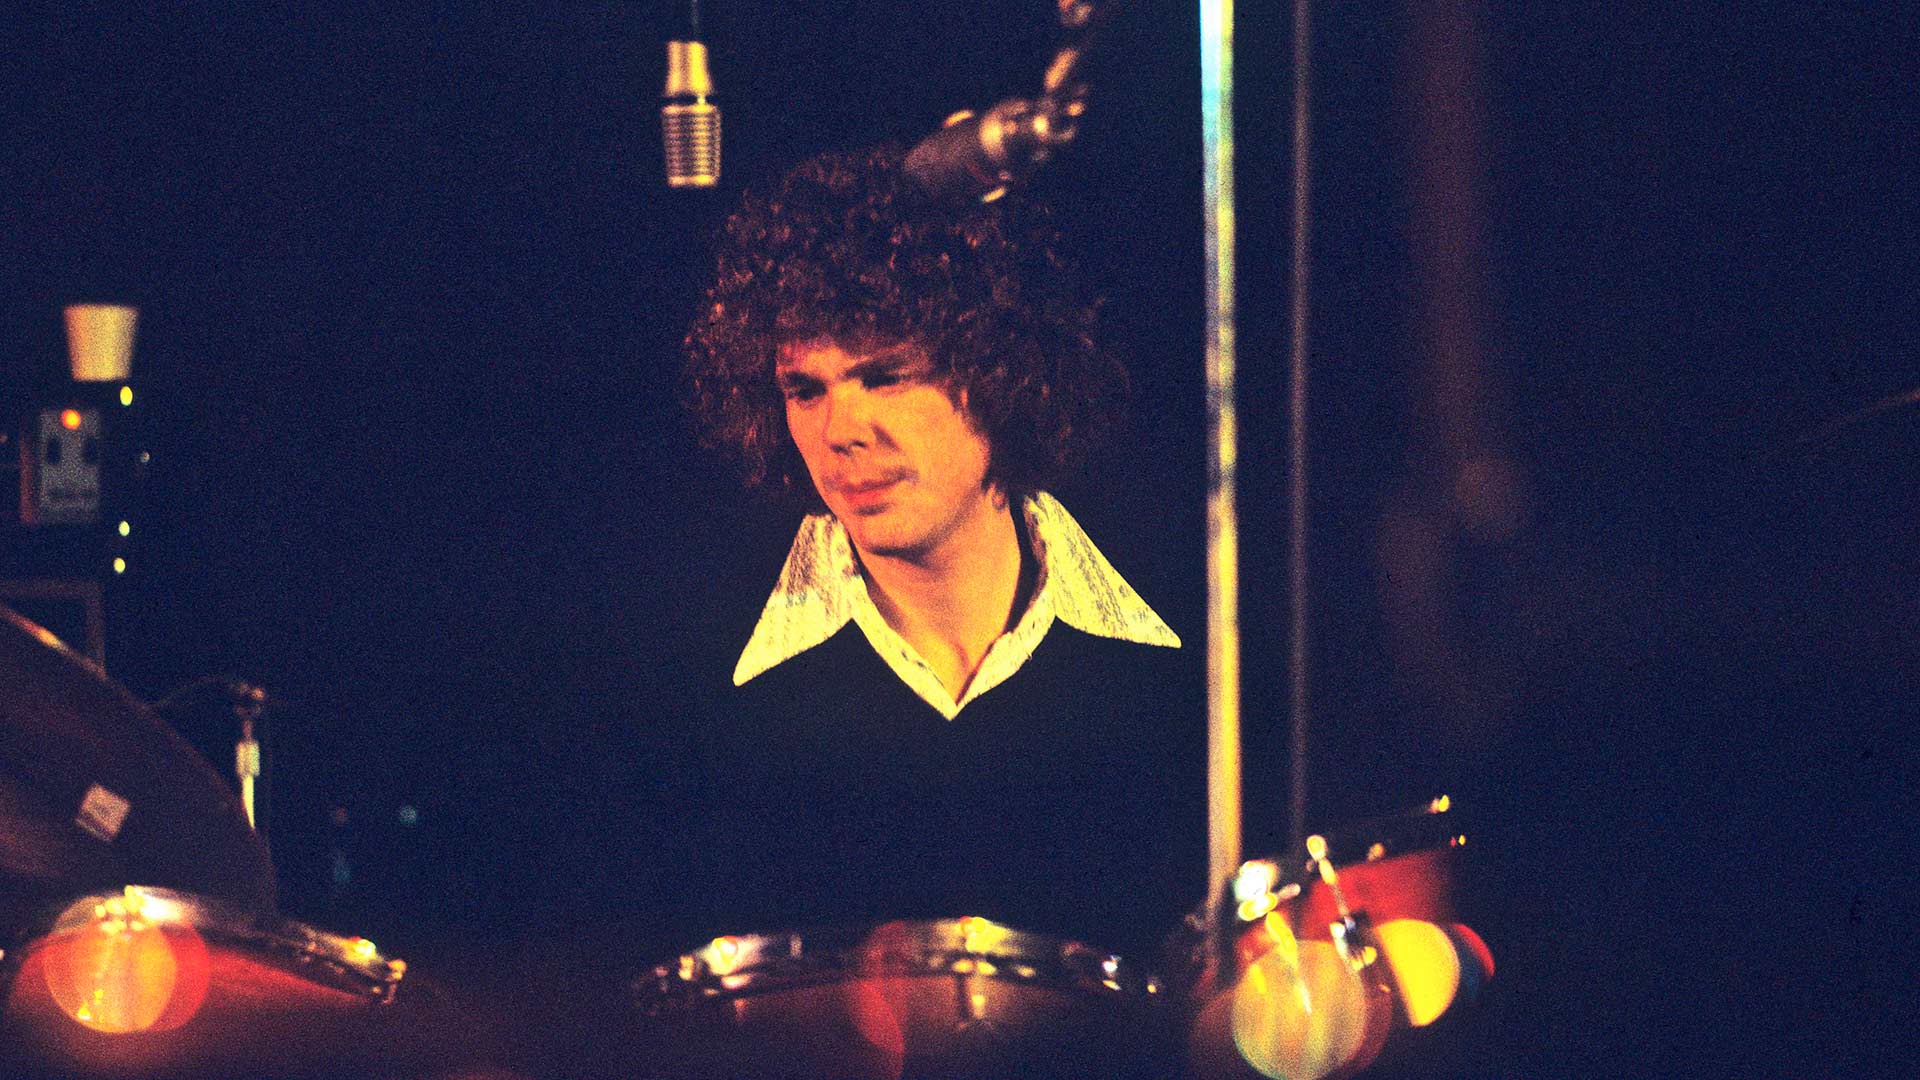 How Drummer Jim Gordon's Undiagnosed Schizophrenia Led to His Mother's Murder